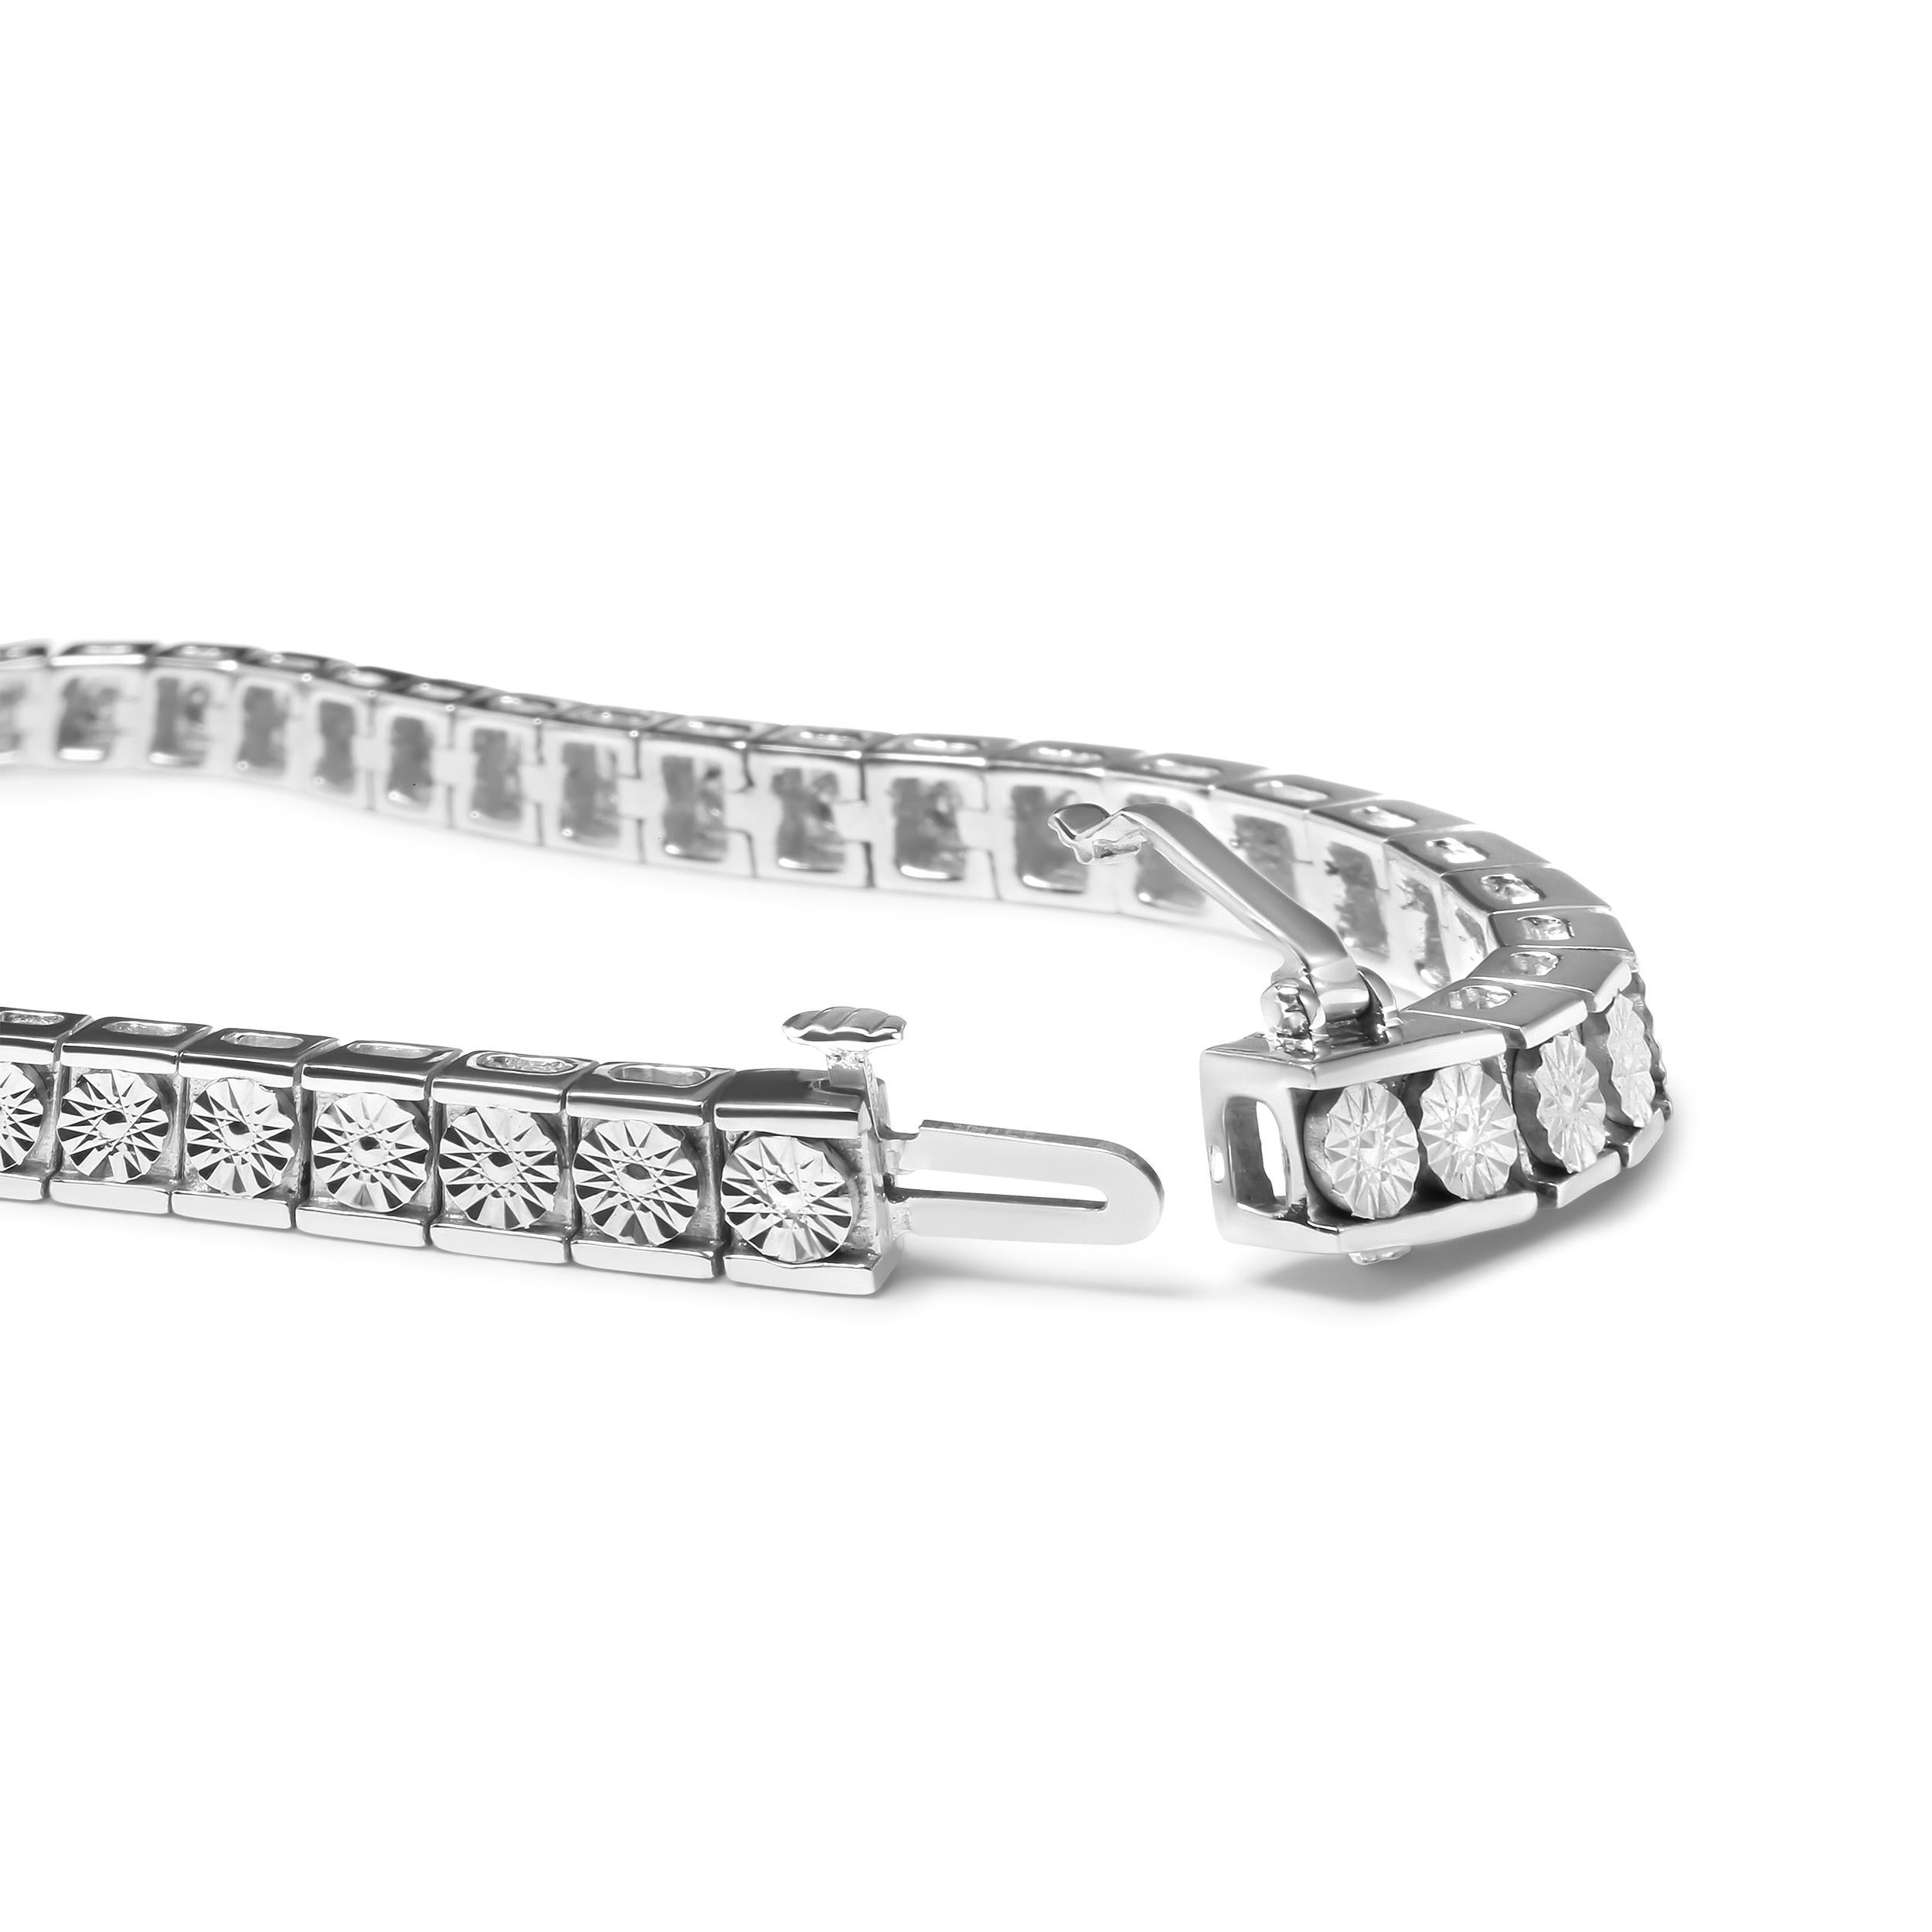 Enhance your jewelry collection with a stunning and elegant addition. This beautiful sterling silver tennis bracelet features a breathtaking display of 24 natural round cut diamonds, weighing in at a total of 1/4 carats. Expertly set in a miracle